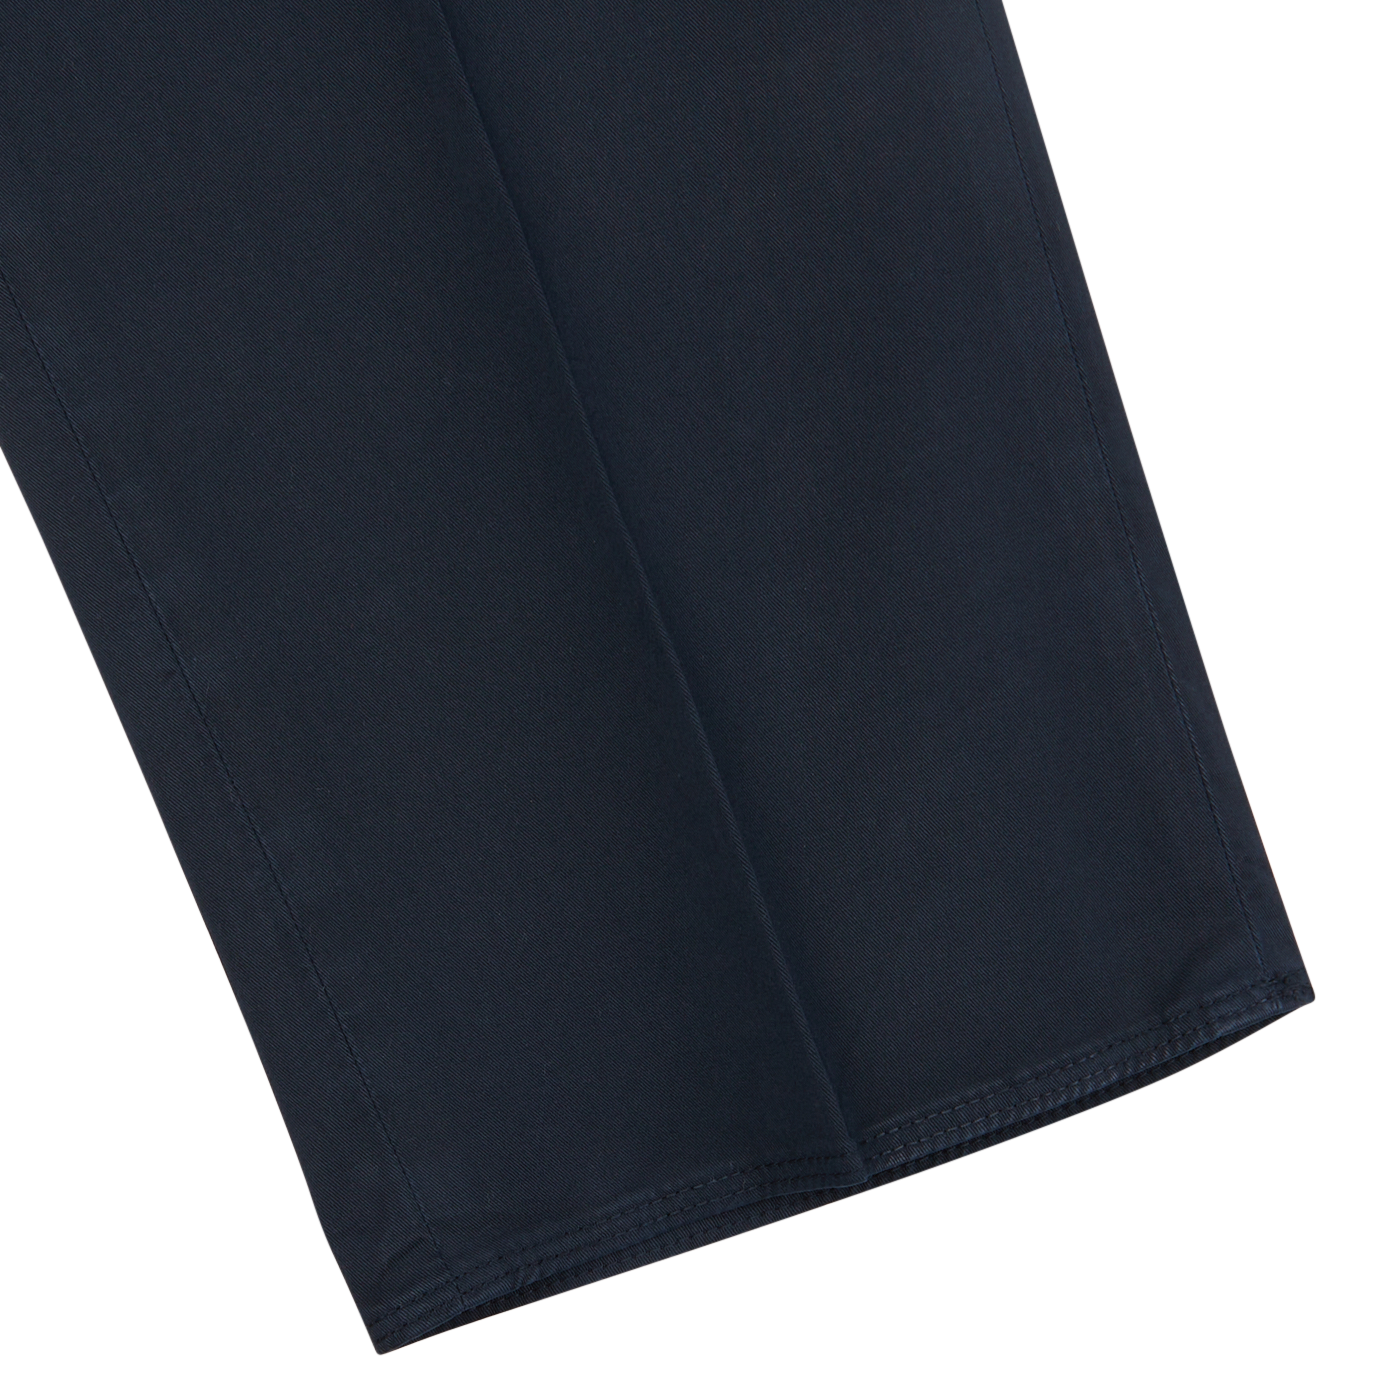 Close-up of Incotex navy blue cotton stretch regular fit chinos fabric, showing clean stitching and smooth texture on a light gray background.